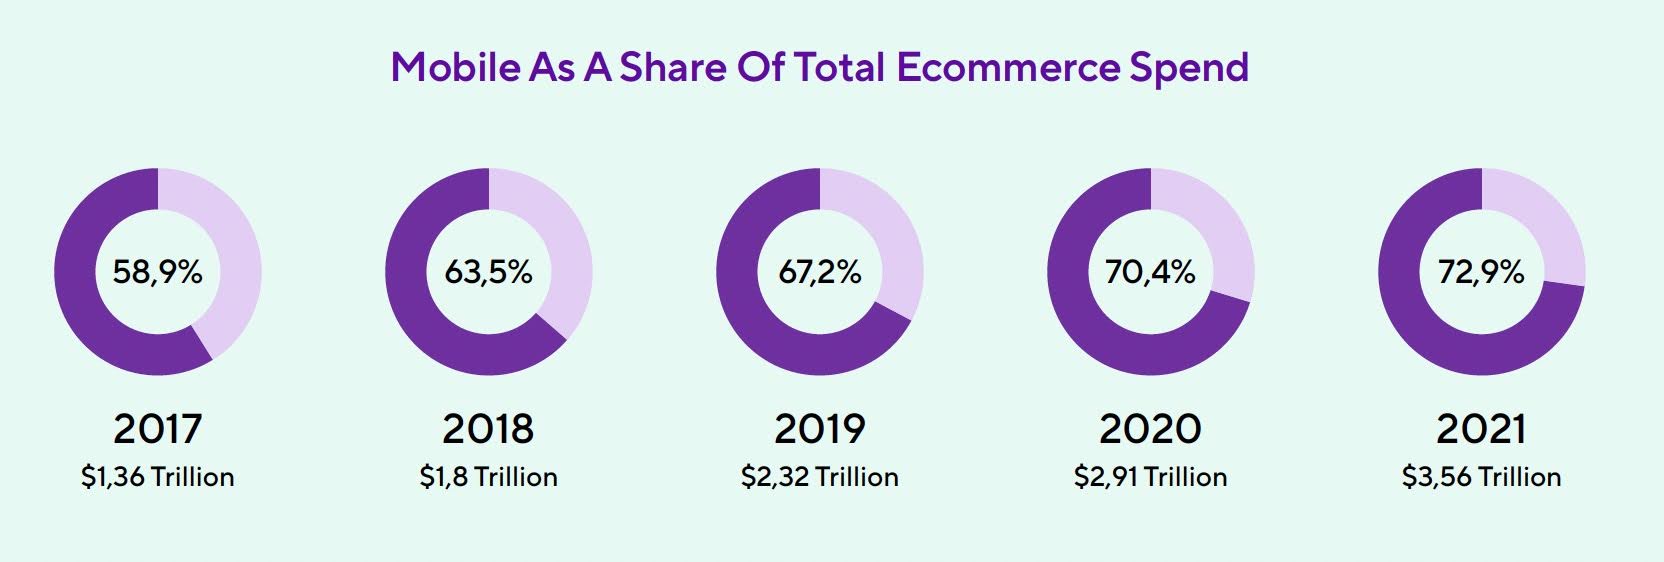 Mobile As A Share Of Total Ecommerce Spend